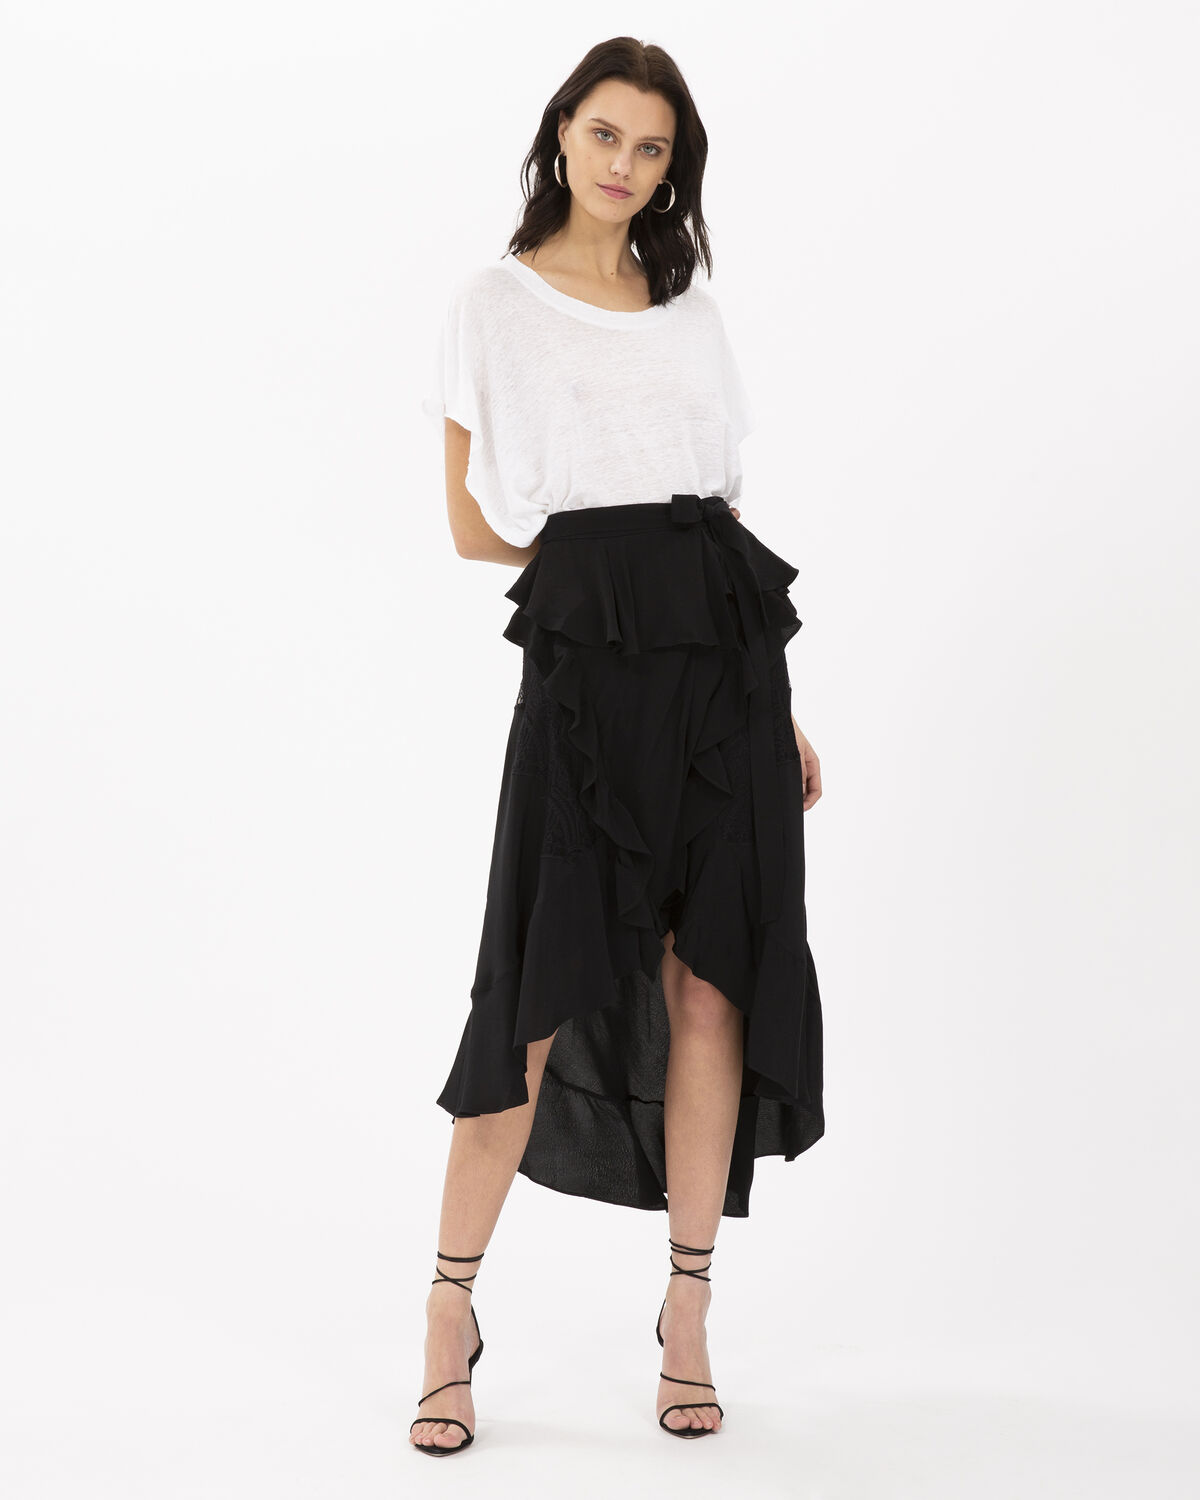 Photo of IRO Paris Breathed Skirt Black - Fluid And Lightweight, This Asymmetrical Mid-length Skirt Reflects The Flamenco Spirit. Belted At The Waist With Its Multiple Ruffles And Embroideries, It Will Be The Sparkling Touch Of Your Summer Outfits. Spring Summer 19